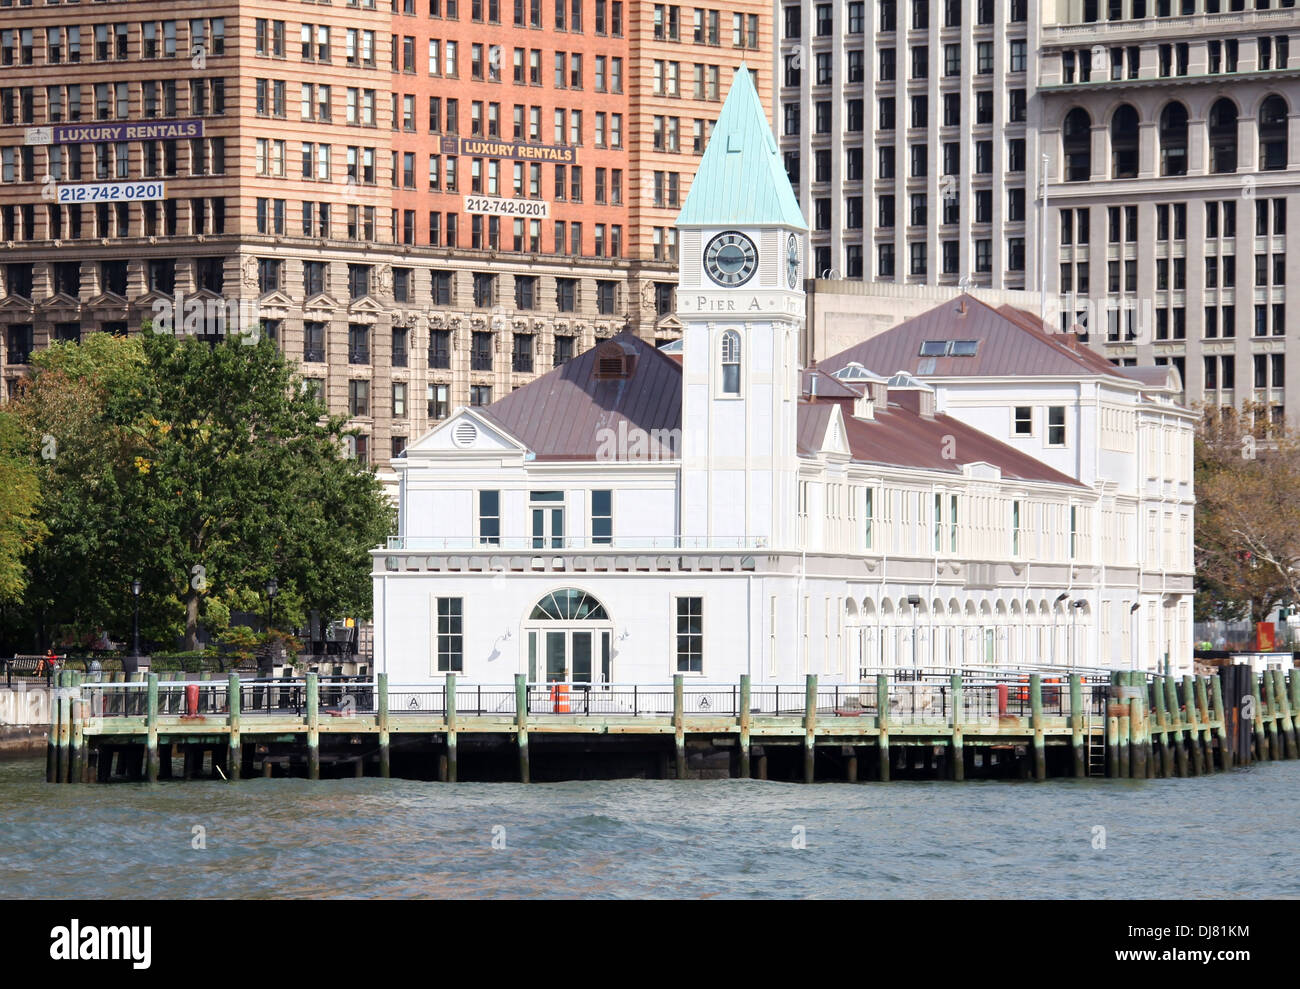 Historic Pier A from the Hudson River in New York City Stock Photo